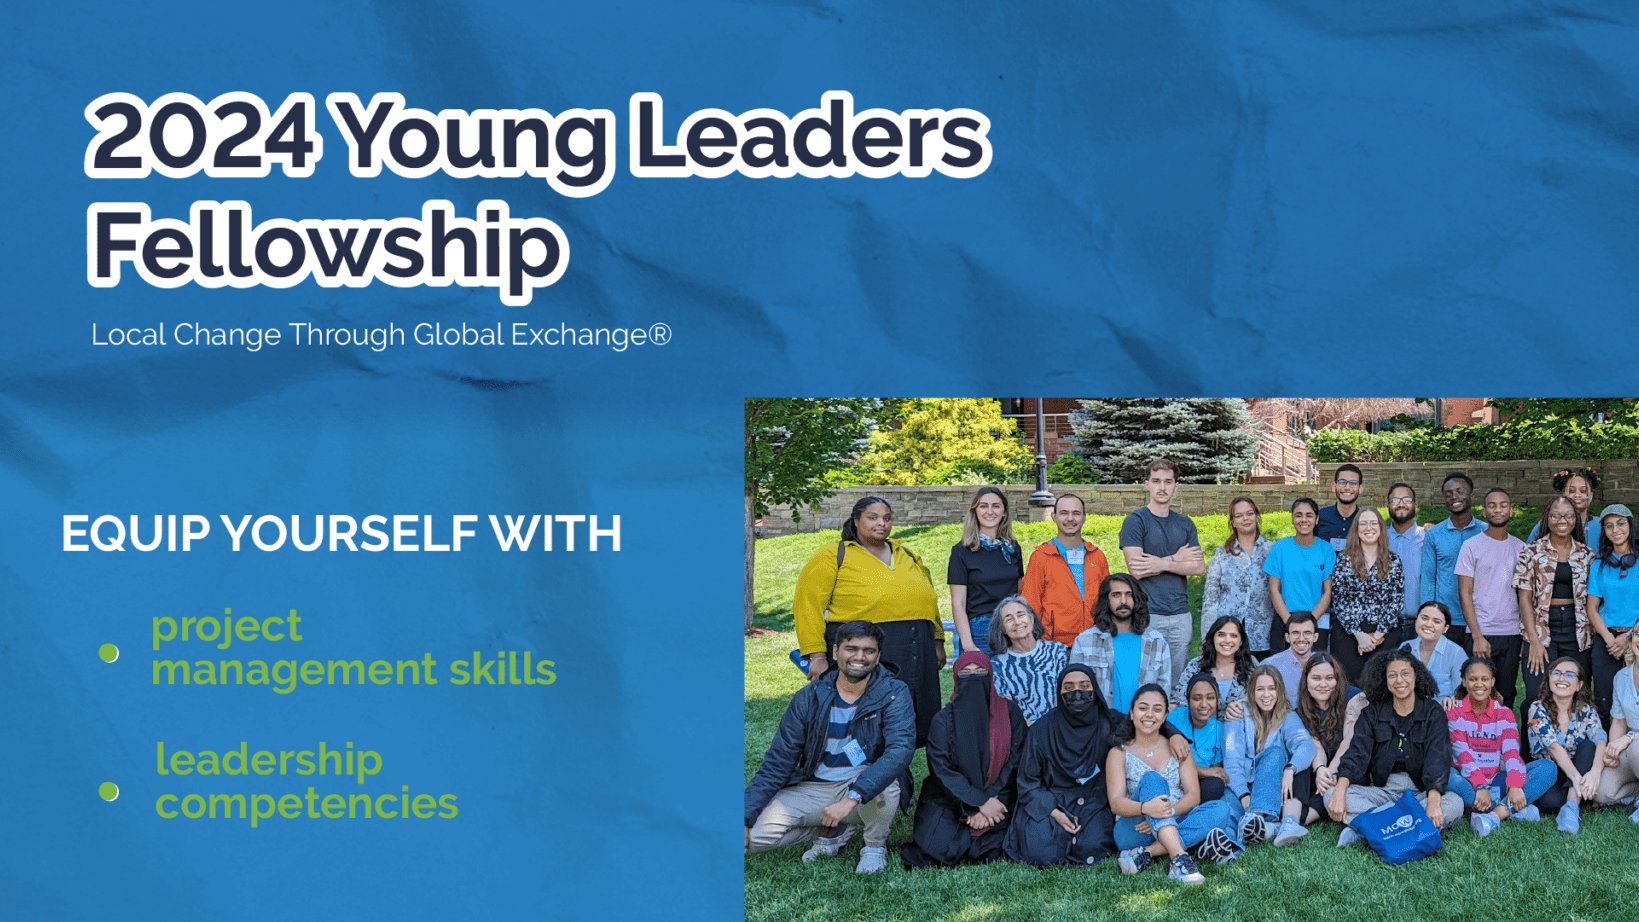 Introducing you to MCW 2024 Young Leaders Fellowship Applications